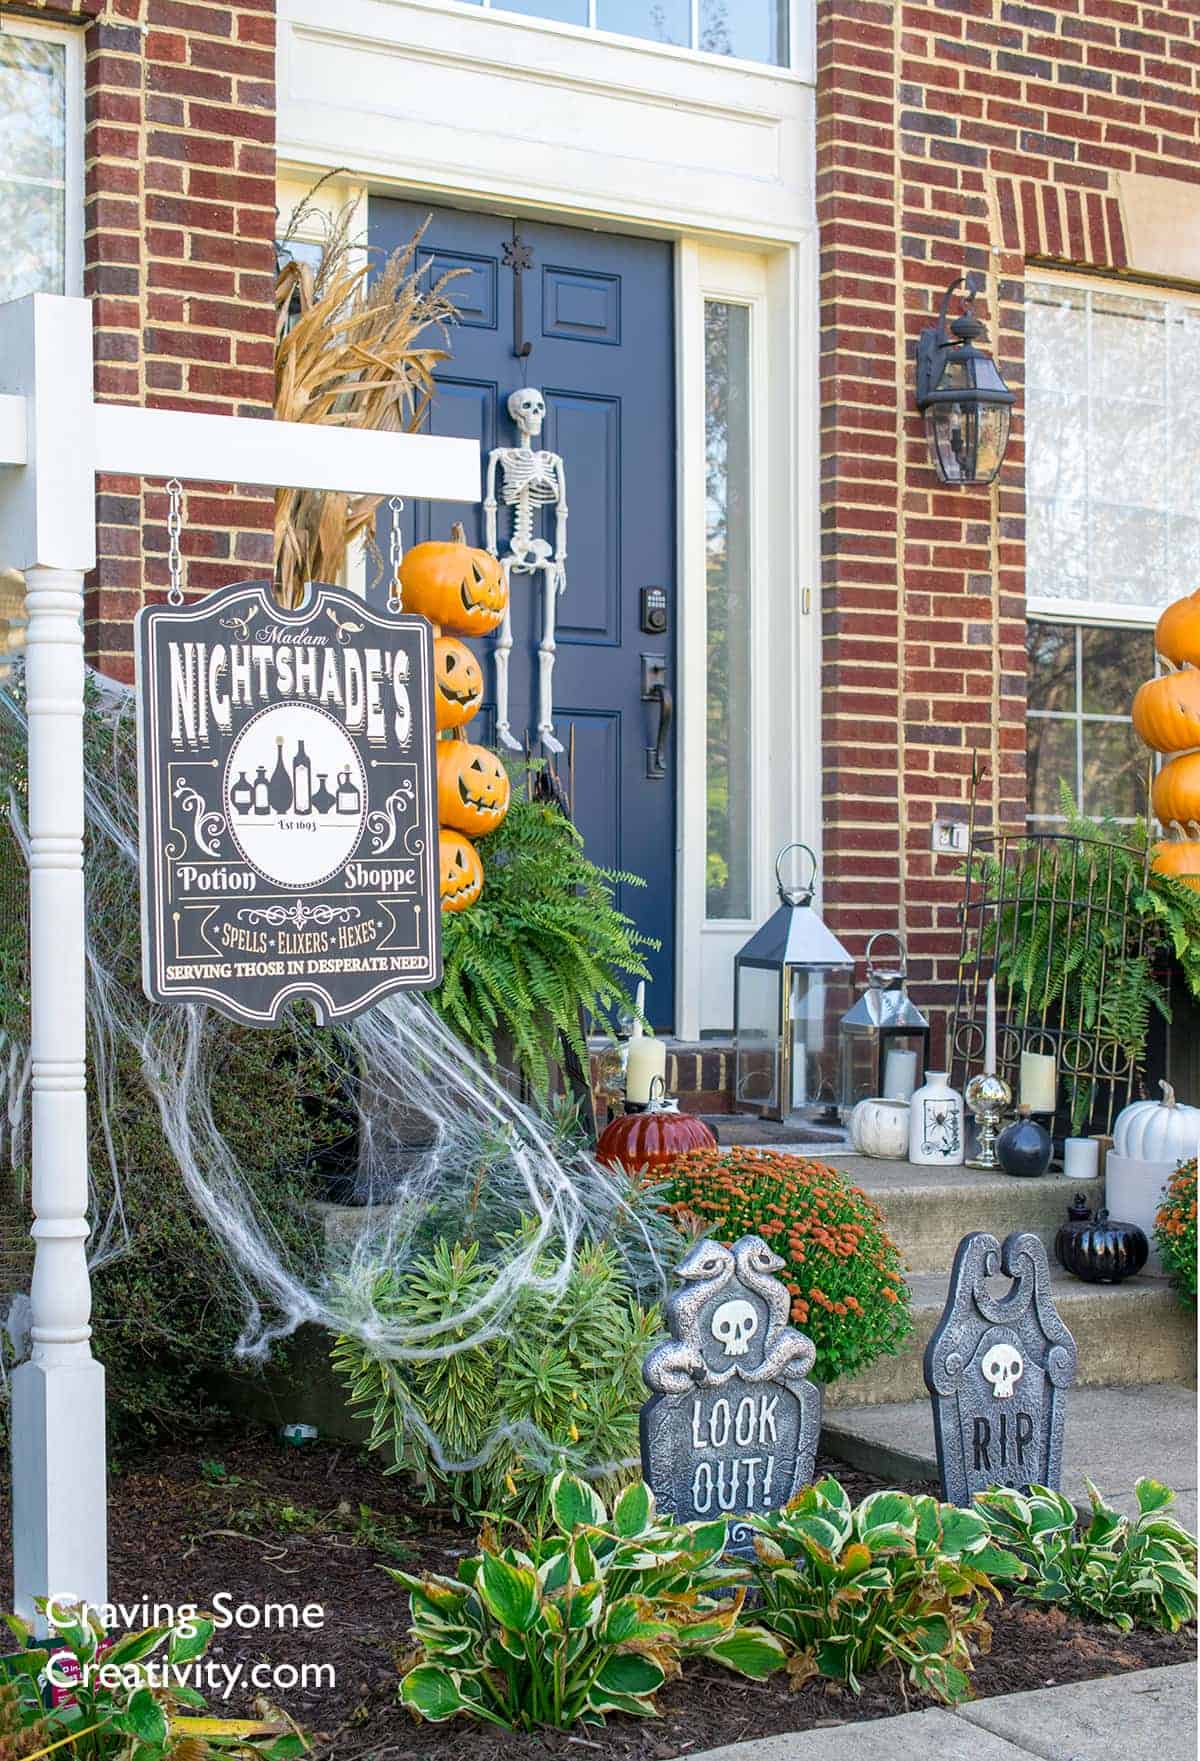 Outdoor Halloween decorations including pumpkins, zombies, graveyard, and a witch house or apothecary shoppe.